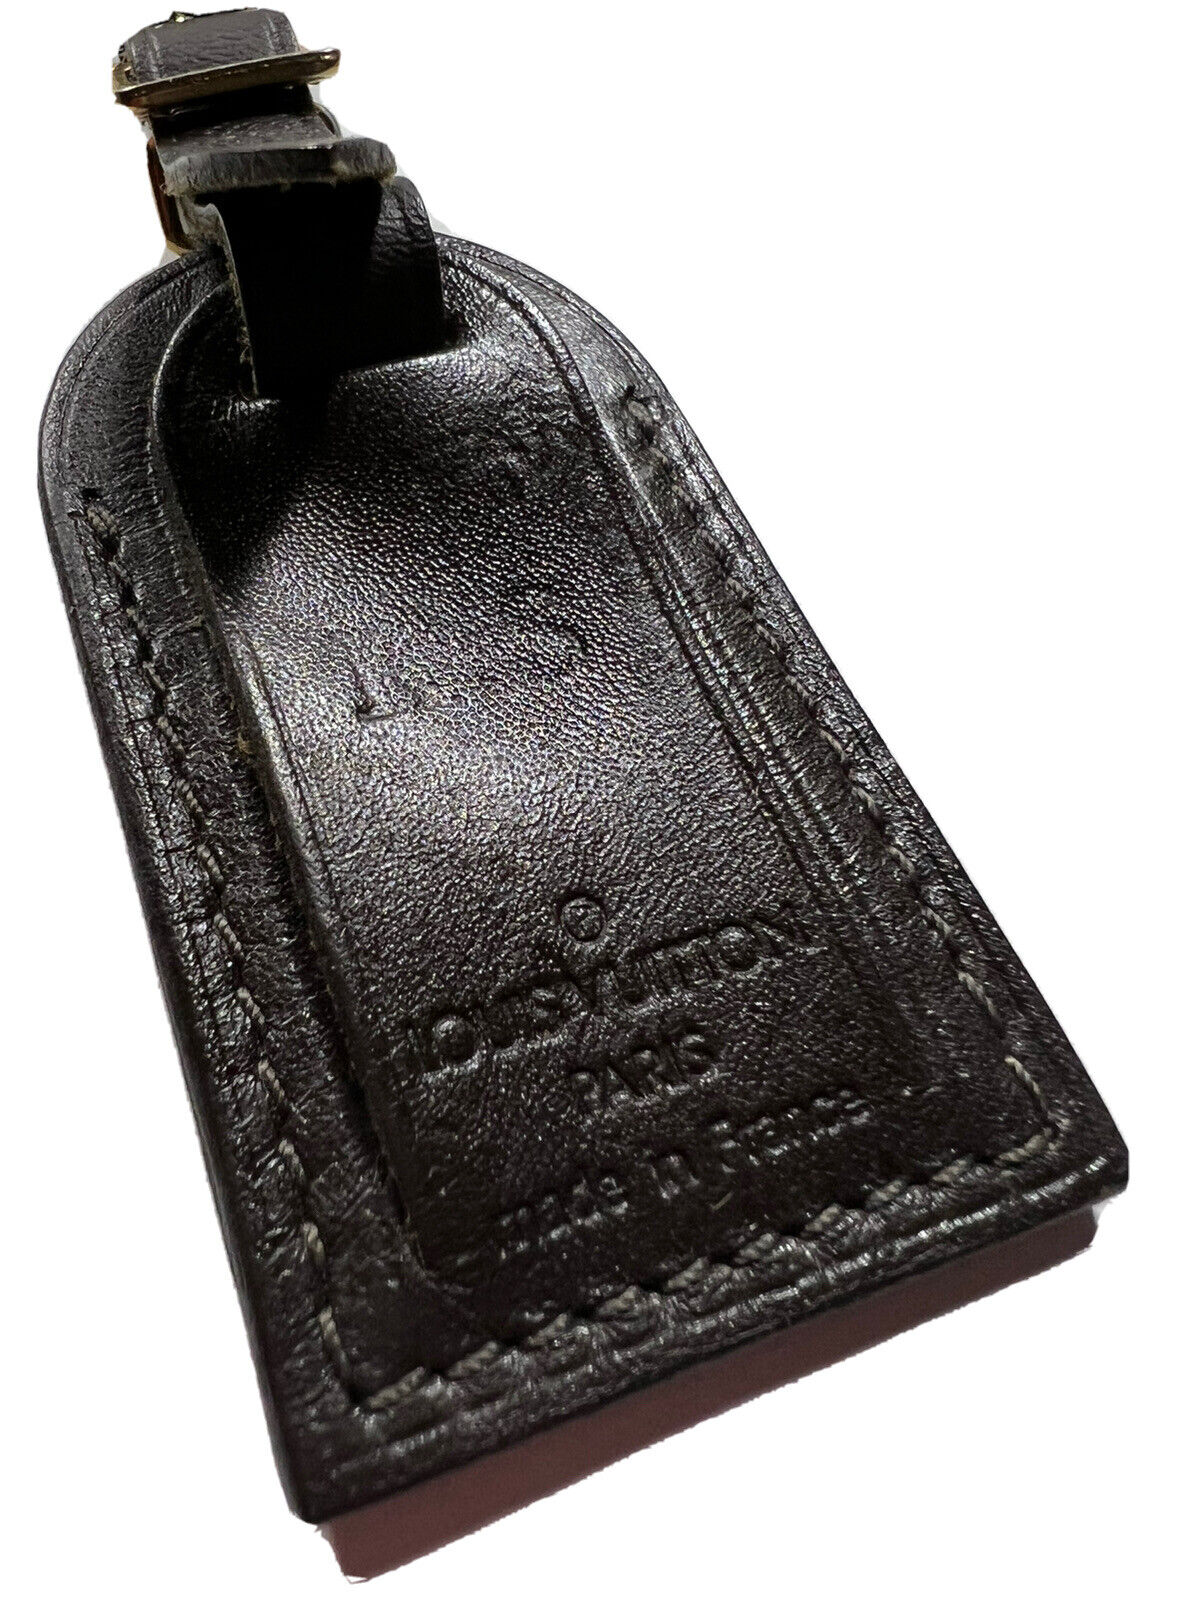 Louis Vuitton Dark Brown Name Tag w/ KS Initials Smooth Calfskin Leather -Small